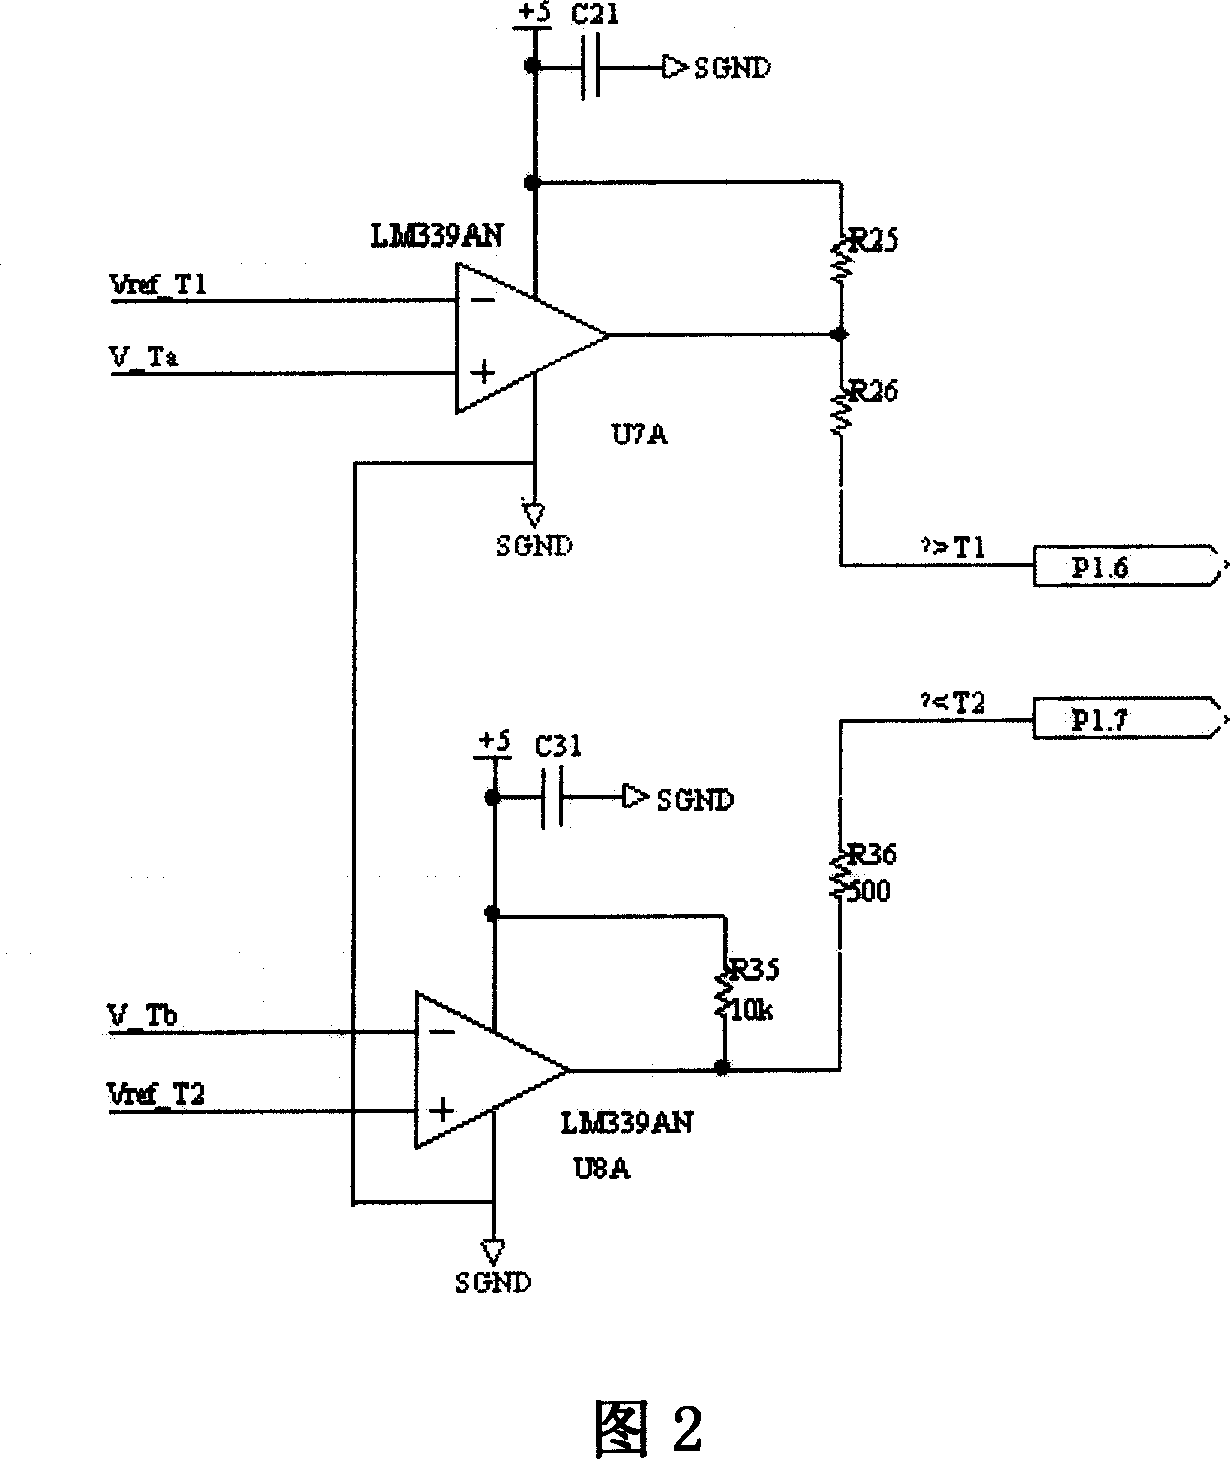 Single chip microcomputer and multi-way analog switch controlled wide temperature range high and low temperature recycle unit